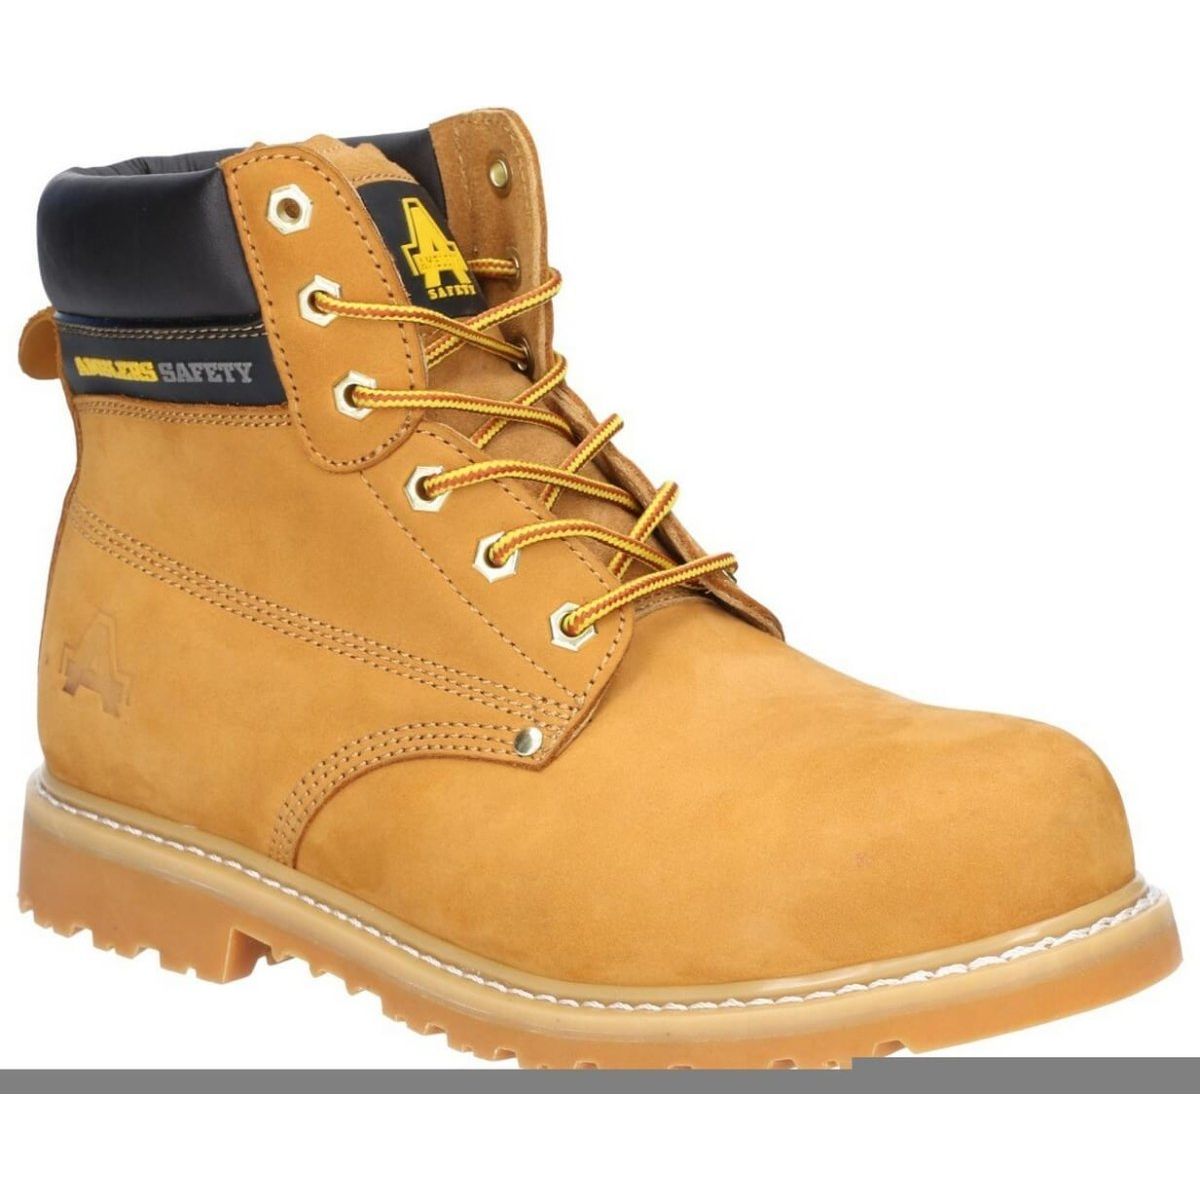 Amblers Fs7 Goodyear Welted Safety Boots Mens - workweargurus.com